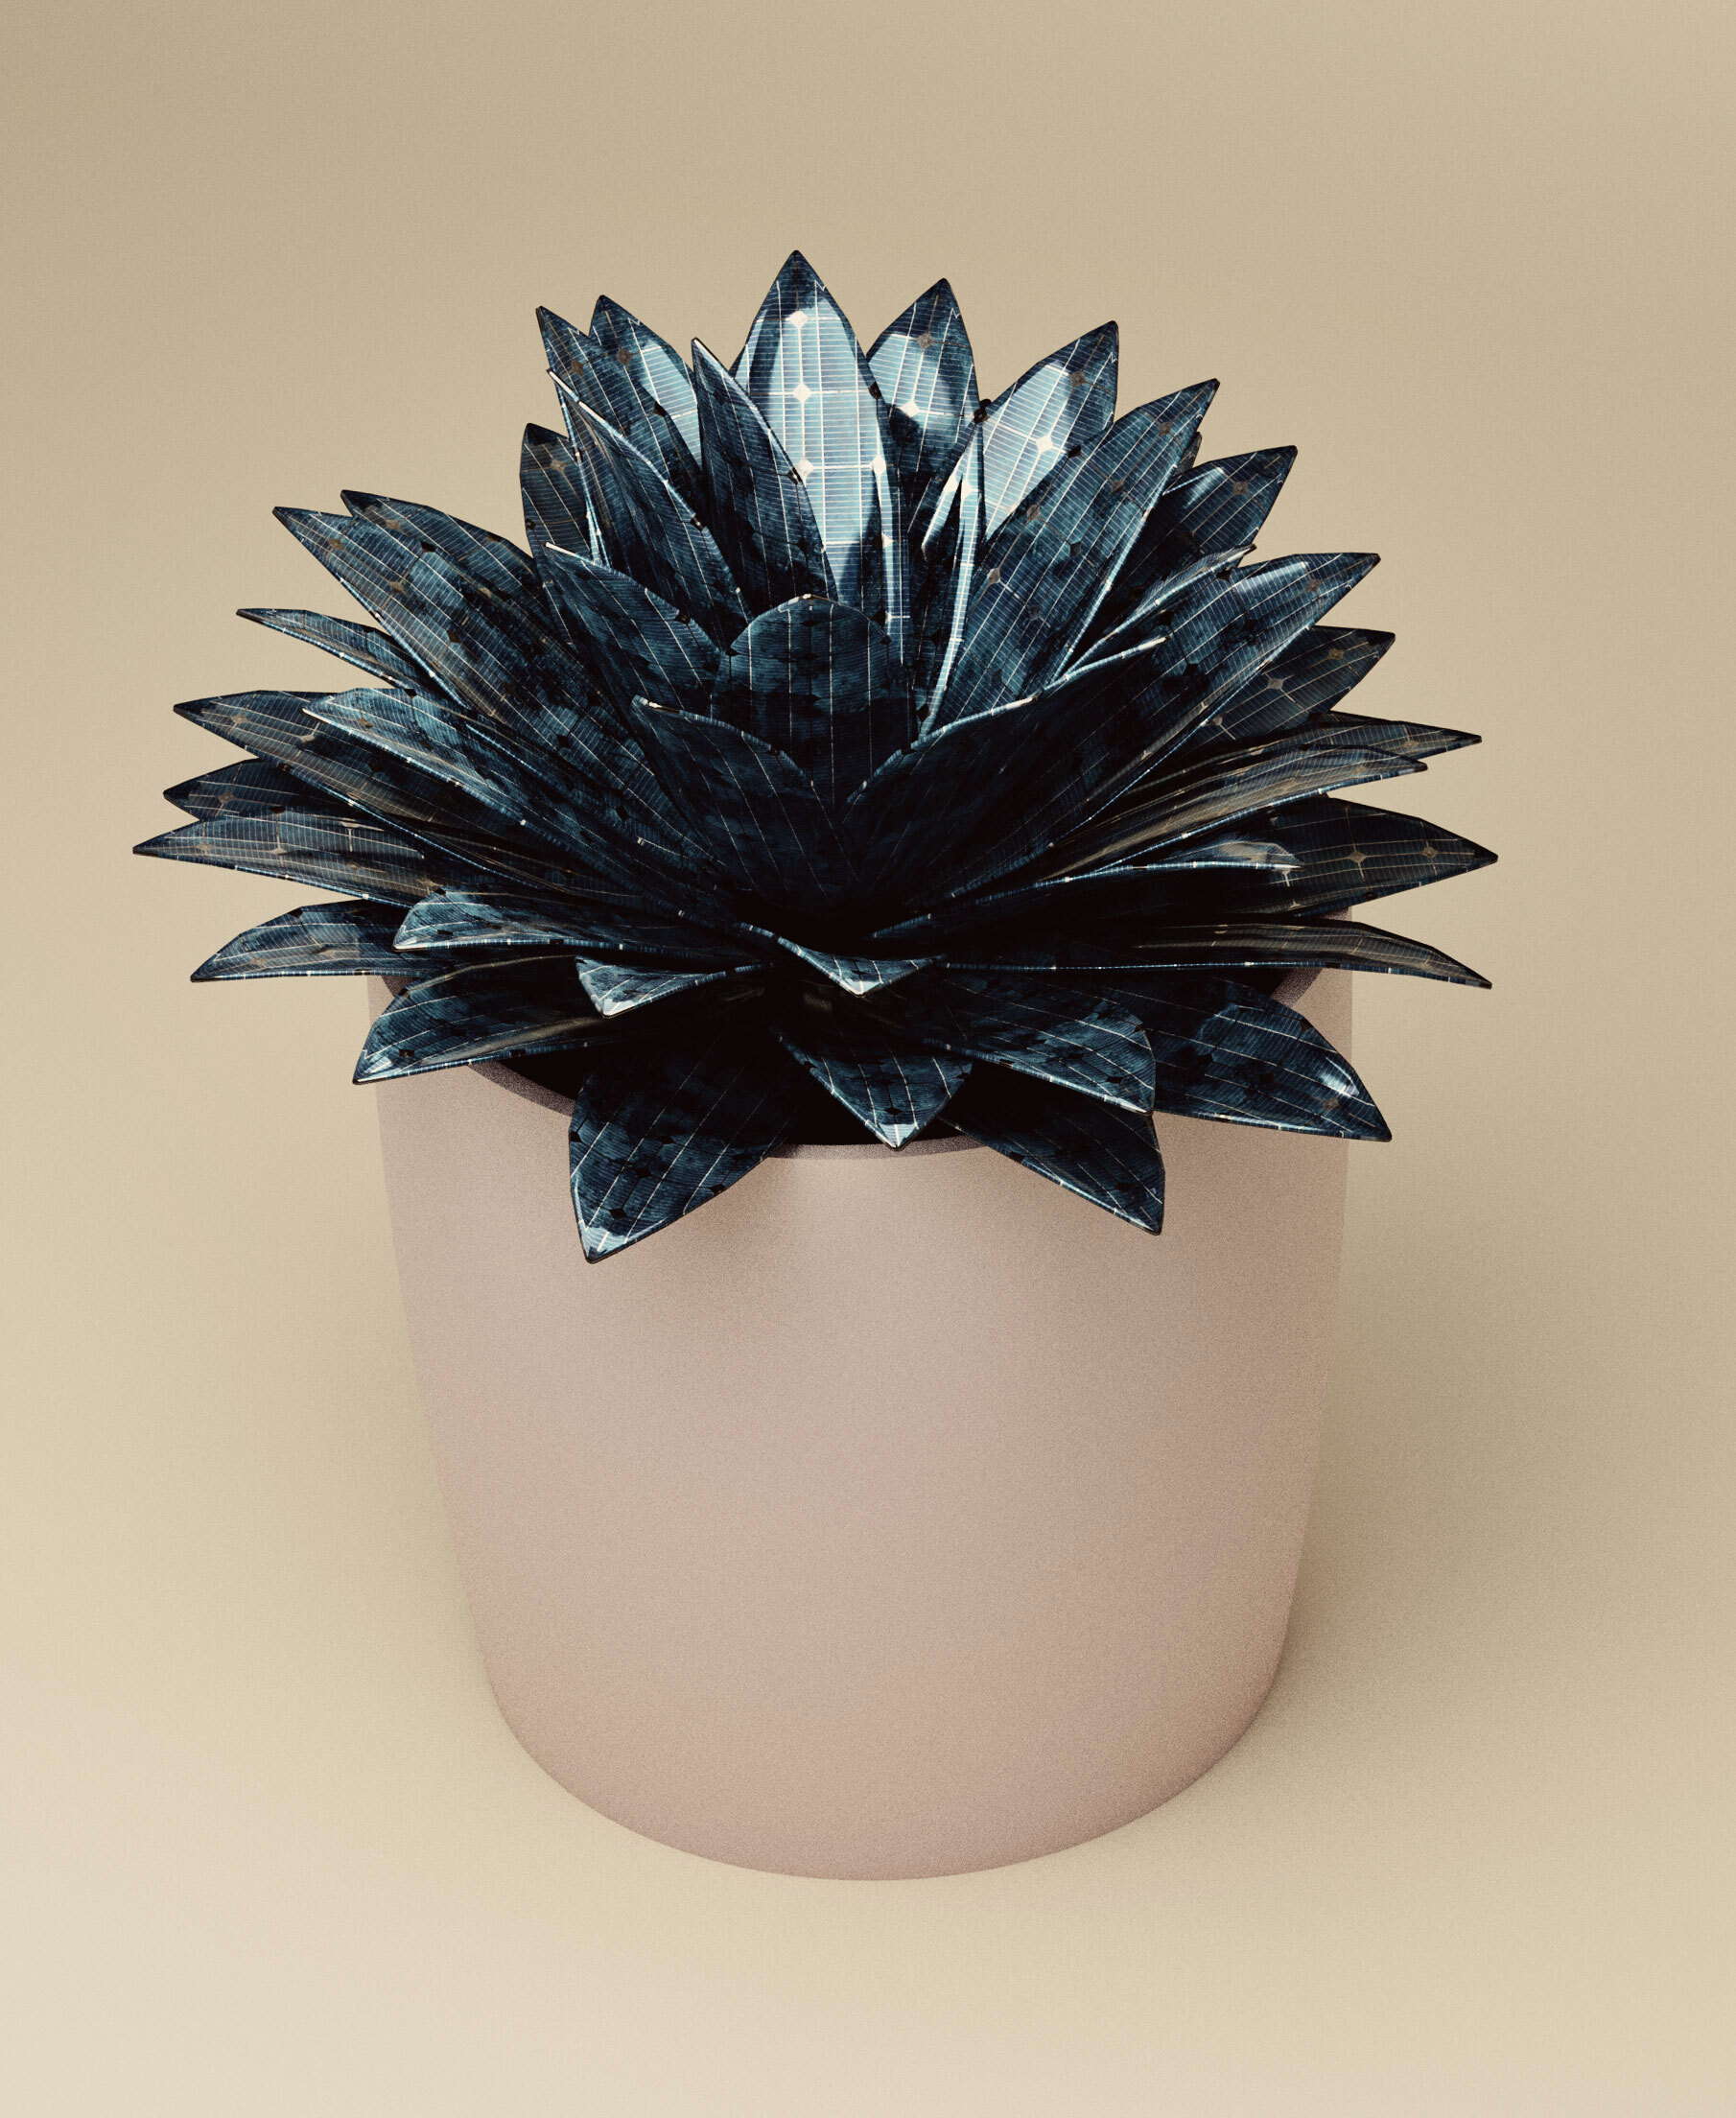 A rendering of an aloe-vera-like object made out of photocoltaics in a clay pot.